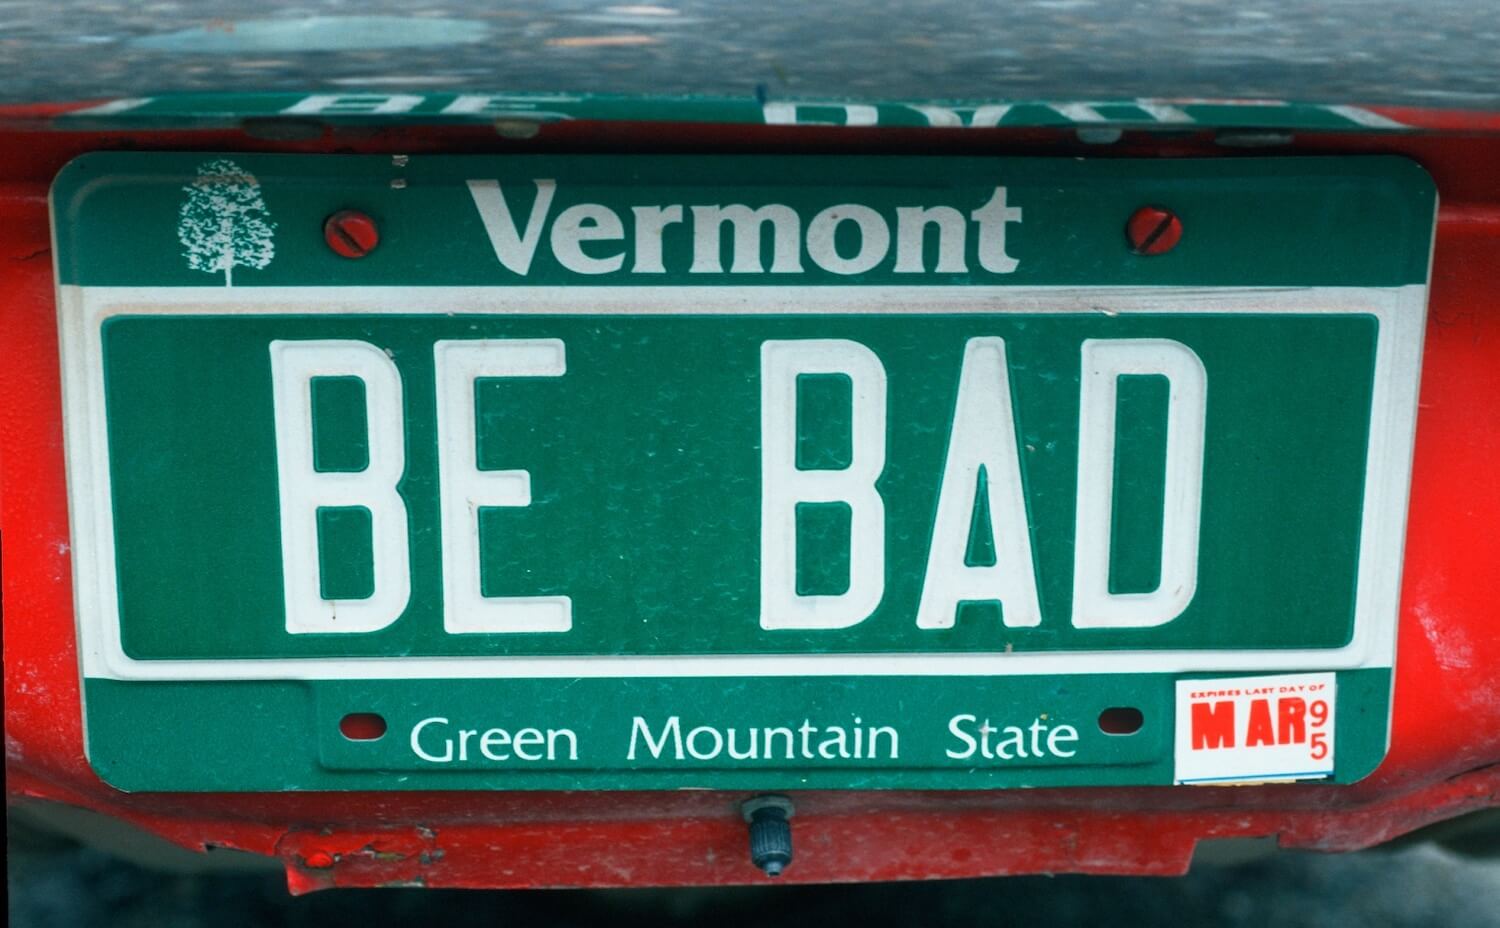 A green Vermont vanity license plate that says "Be Bad"